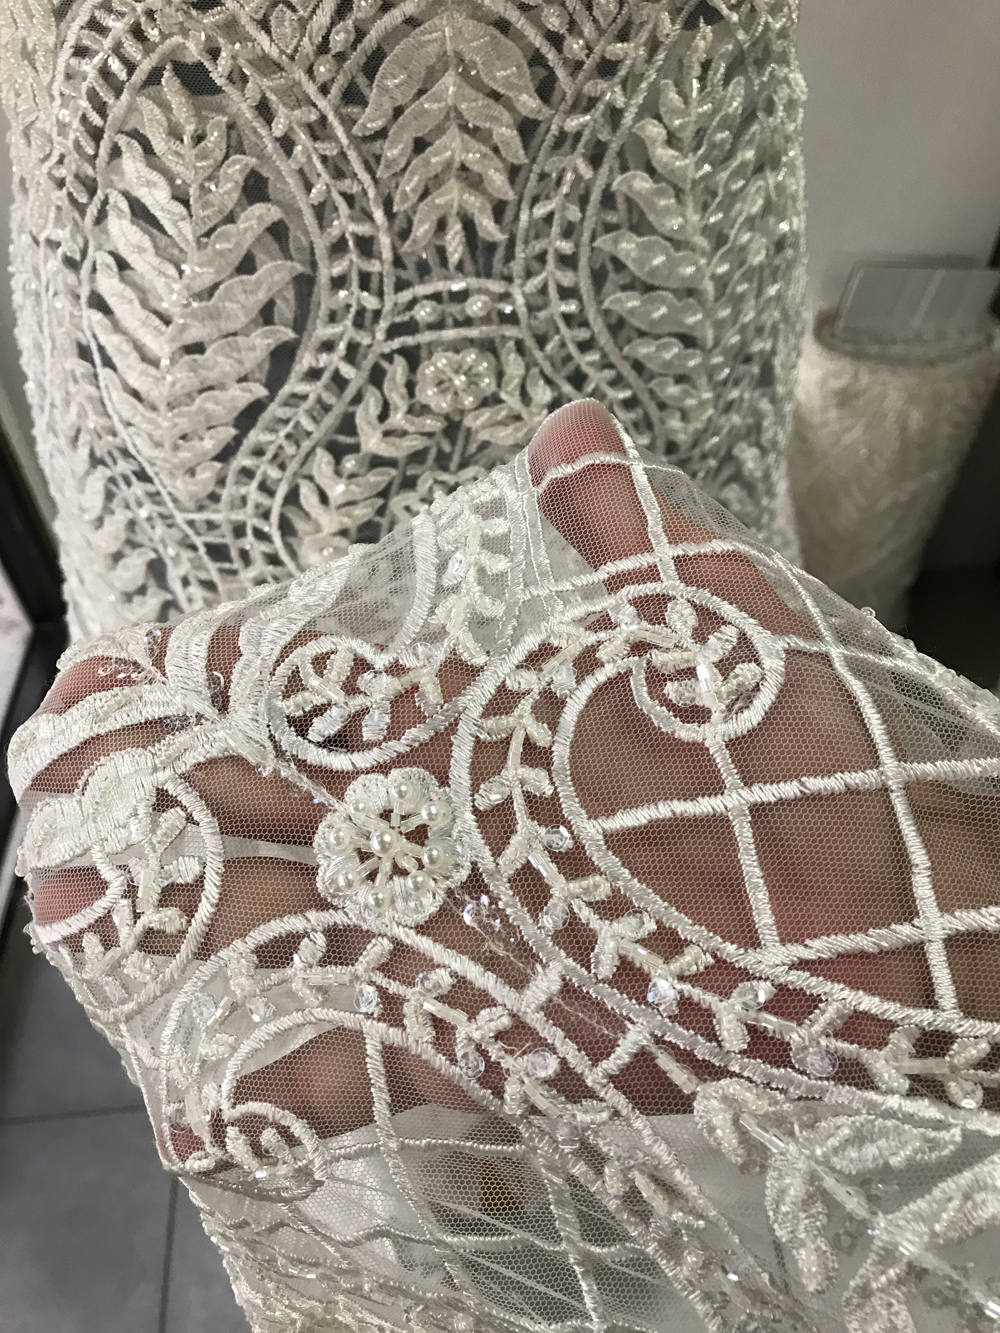 Off White Light Ivory bridal lace fabric embroidered beaded pearls sequins floral Baroque design, wedding dress scallop edge